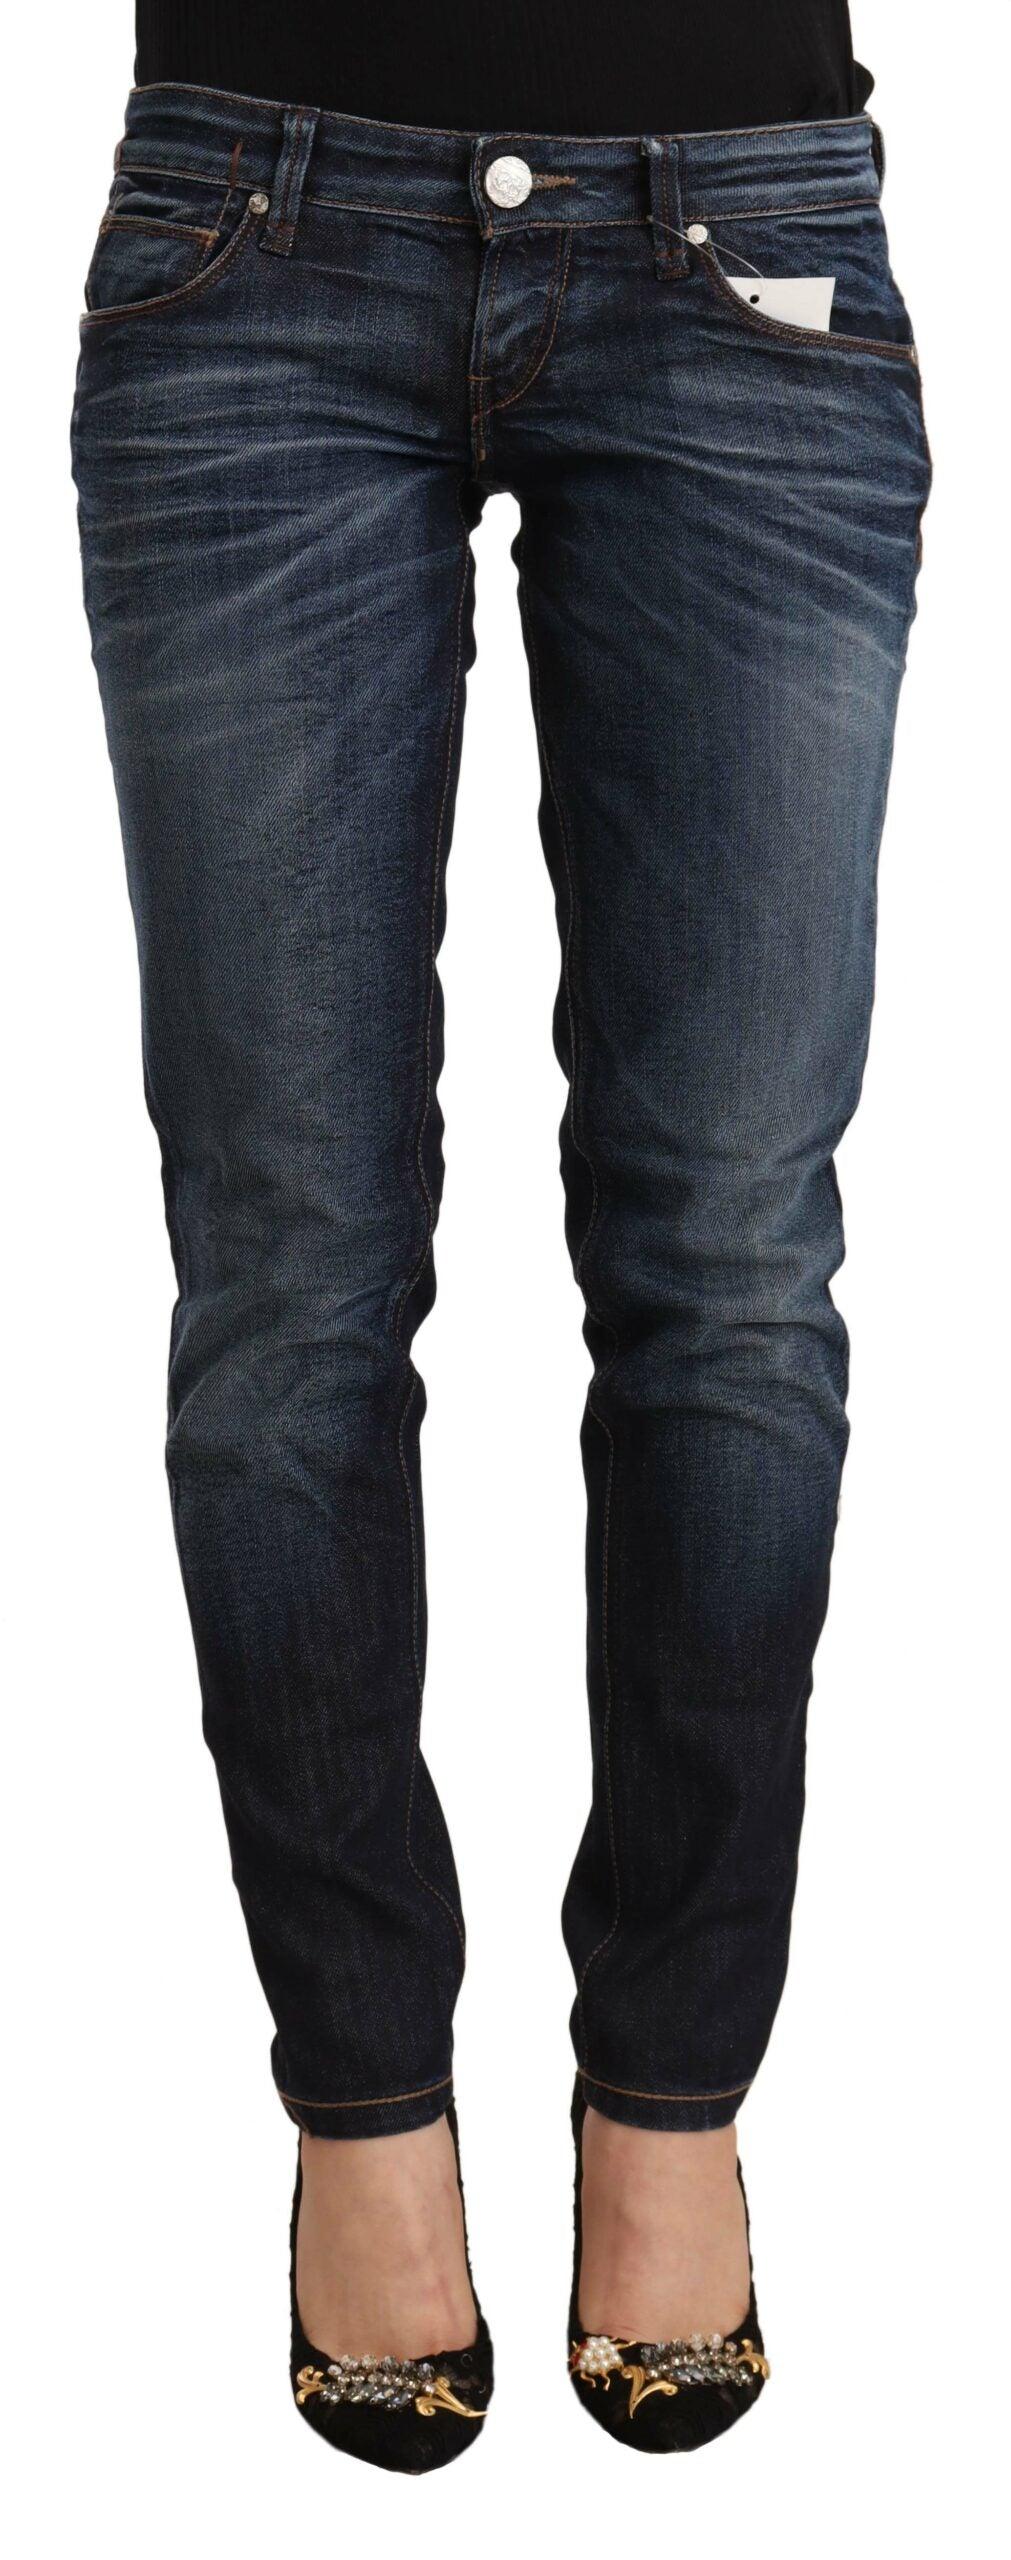 Acht Chic Slim Fit Blue Washed Jeans - PER.FASHION